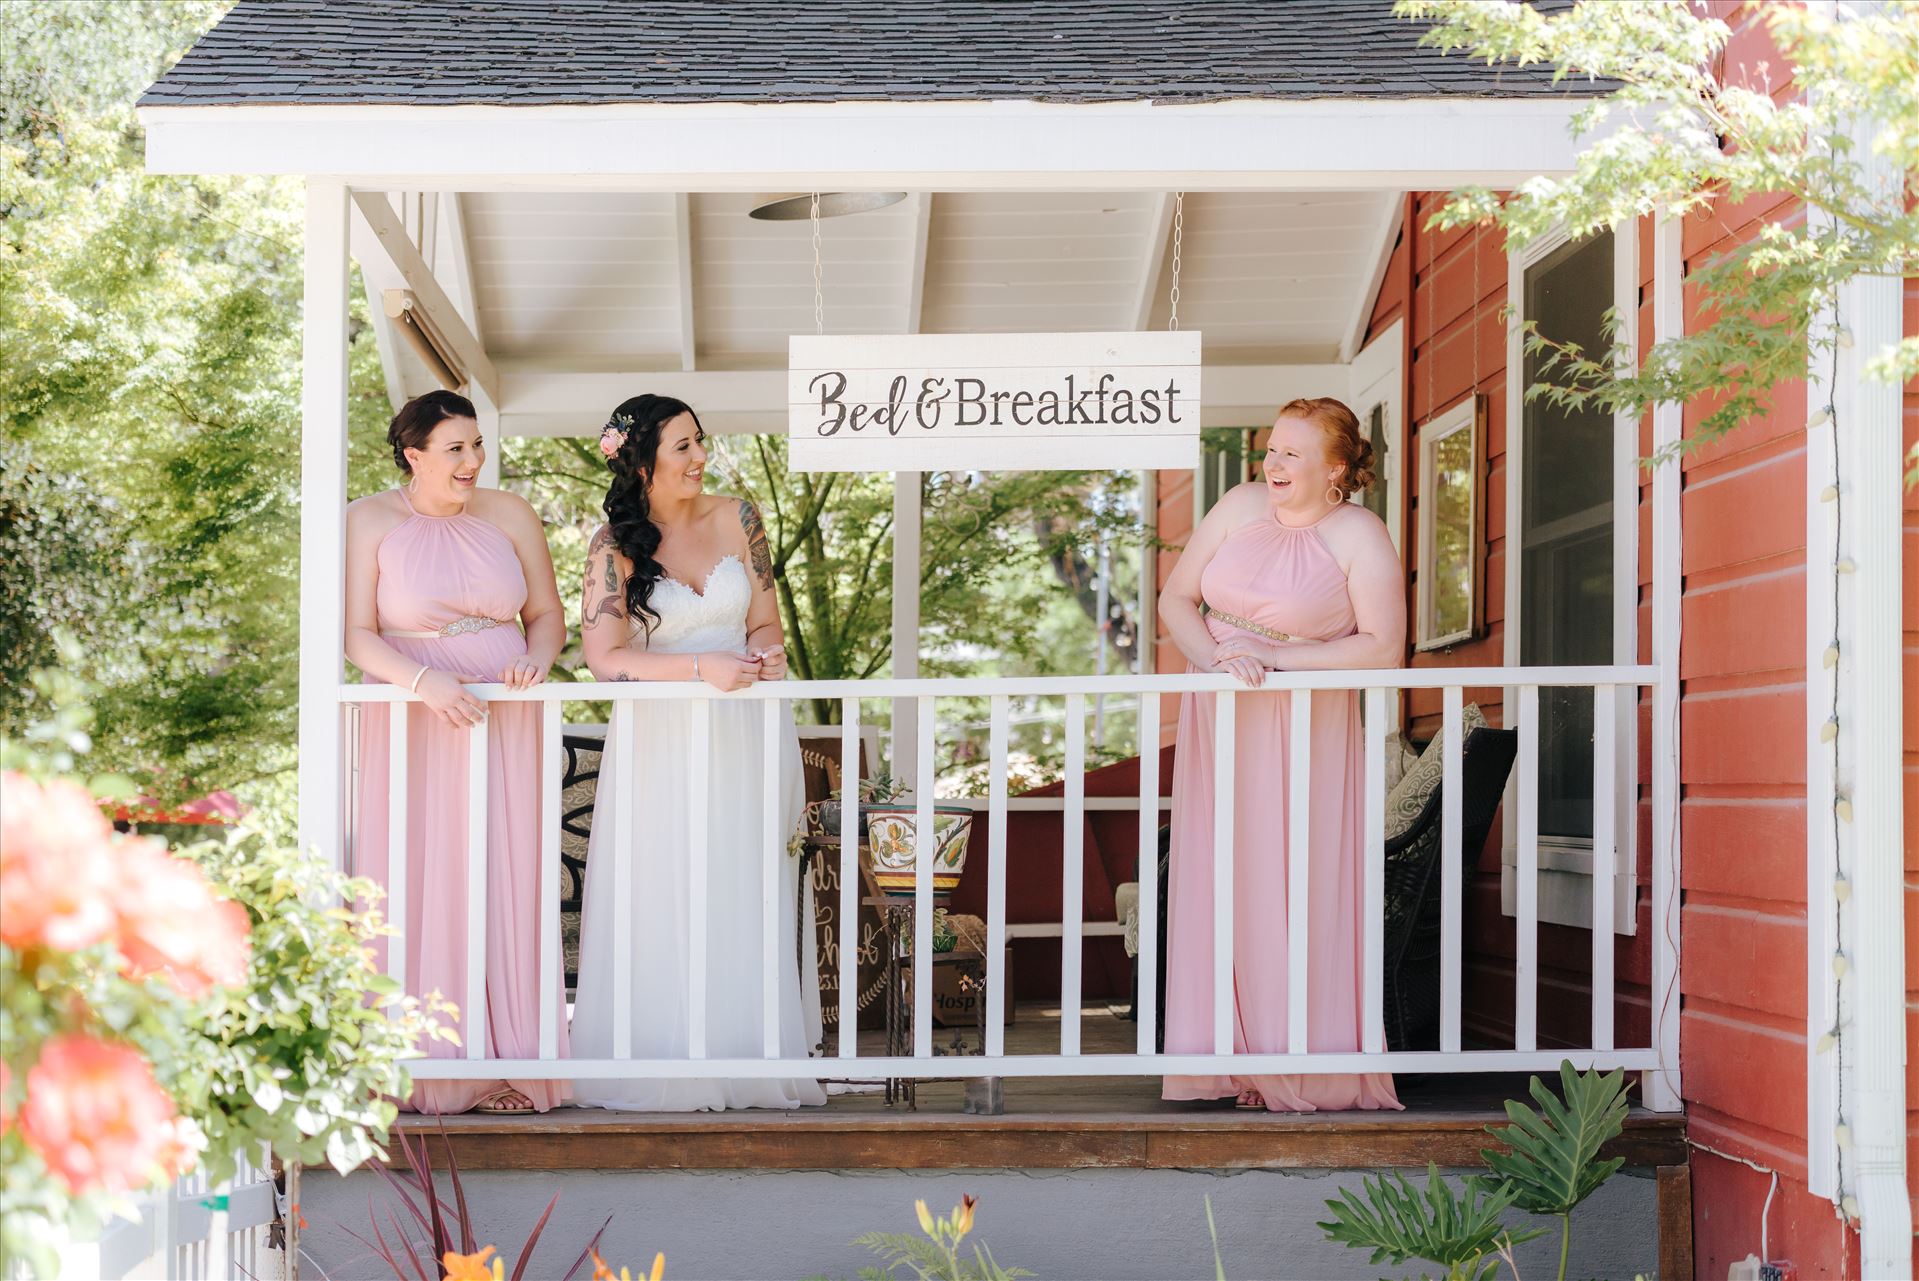 Kendra and Mitchell 032 Emily House Bed and Breakfast Paso Robles California Wedding Photography by Mirrors Edge Photography. Bride and her bridesmaids by Sarah Williams